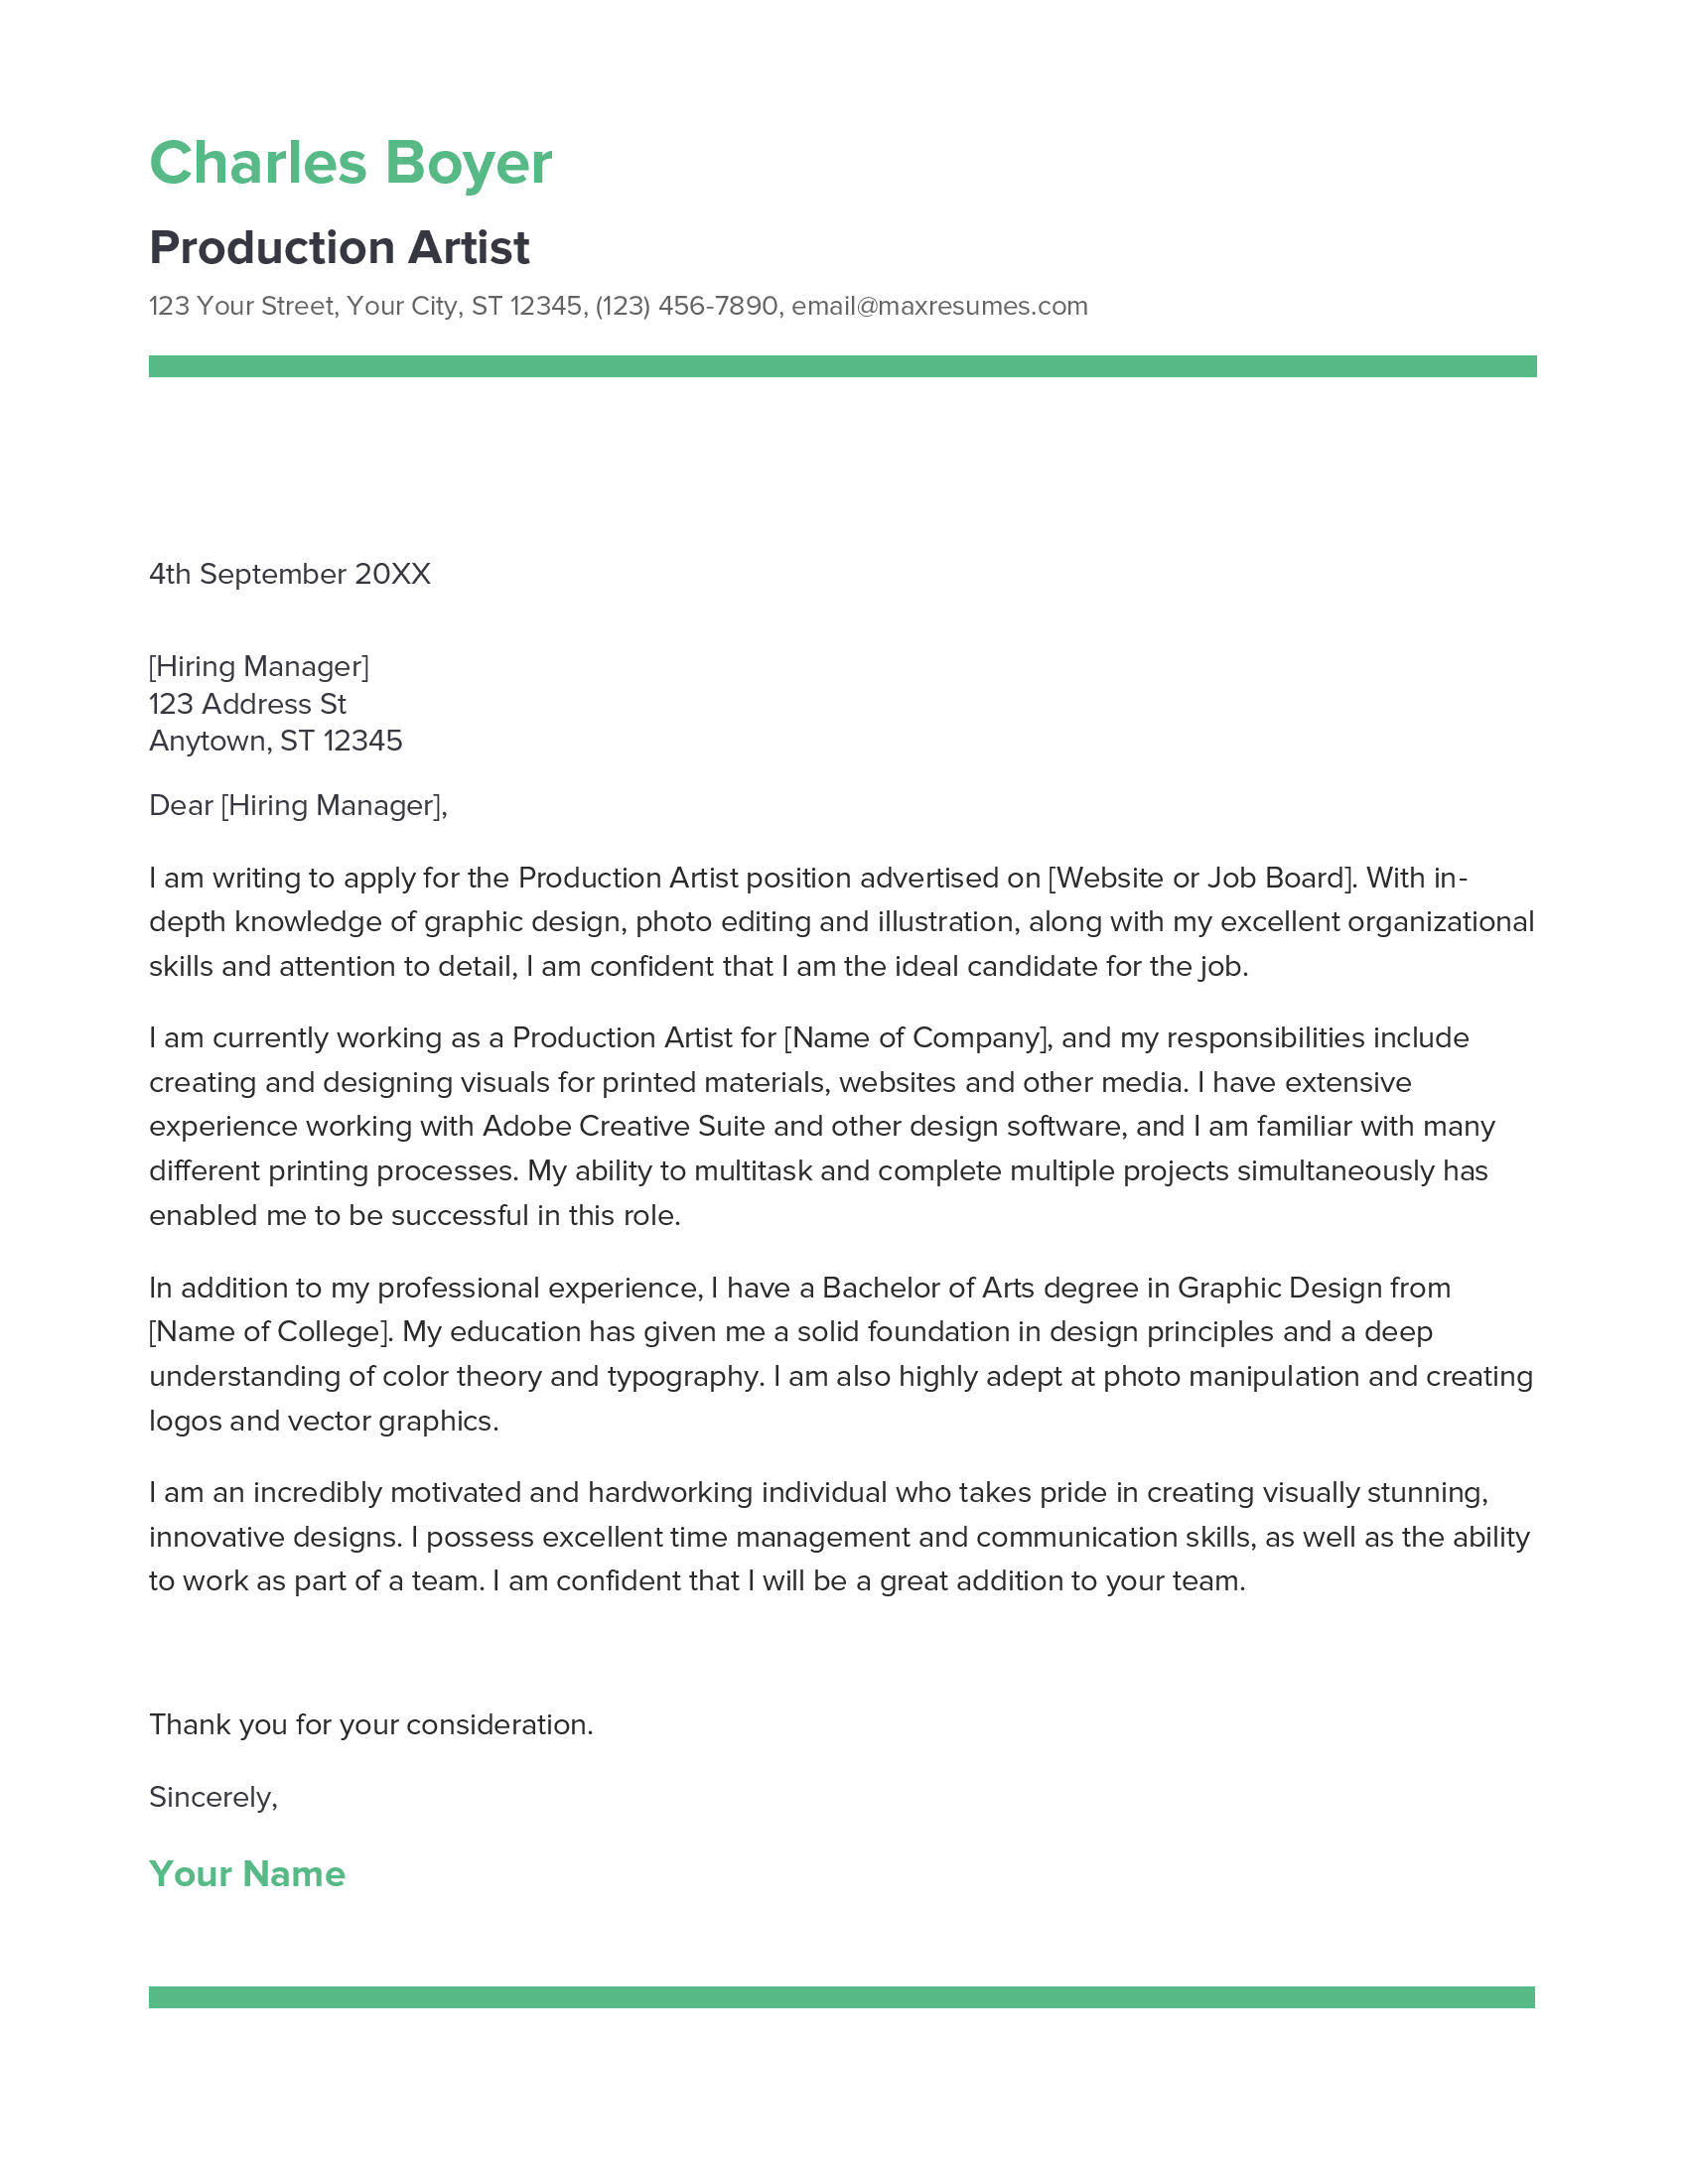 Production Artist Cover Letter Example